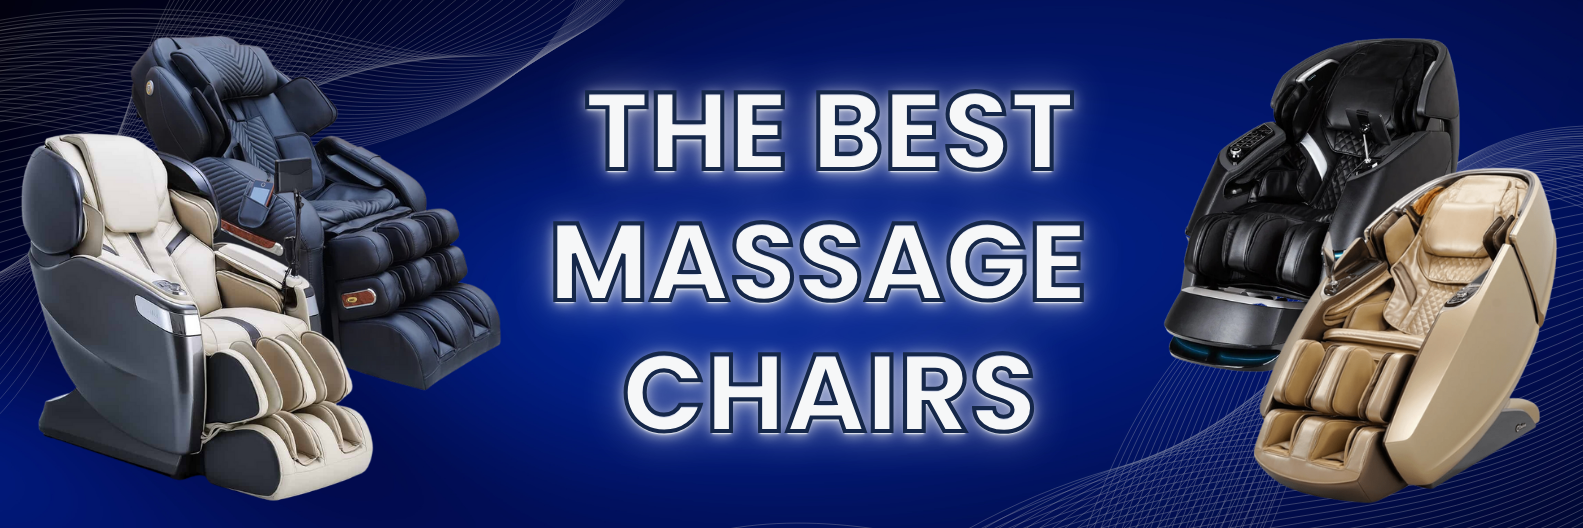 Customers often ask us which are the best massage chairs since there are literally hundreds of options to choose from. We base our best massage chair picks on overall customer satisfaction. 